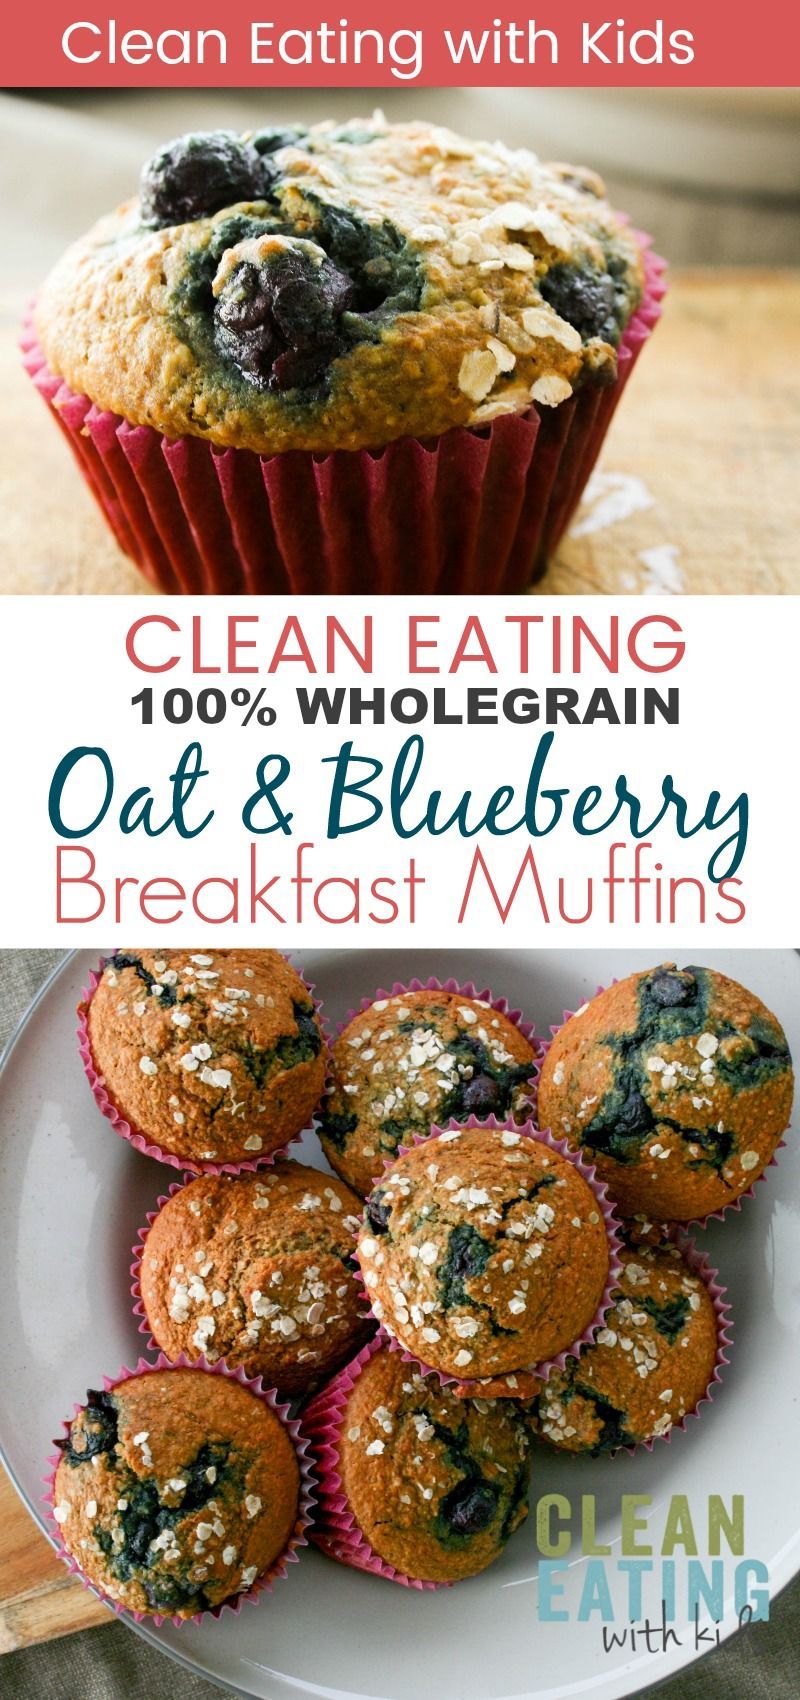 Clean Eating Oat Bran Blueberry Muffins - Clean Eating with kids -   17 desserts Blueberry clean eating ideas